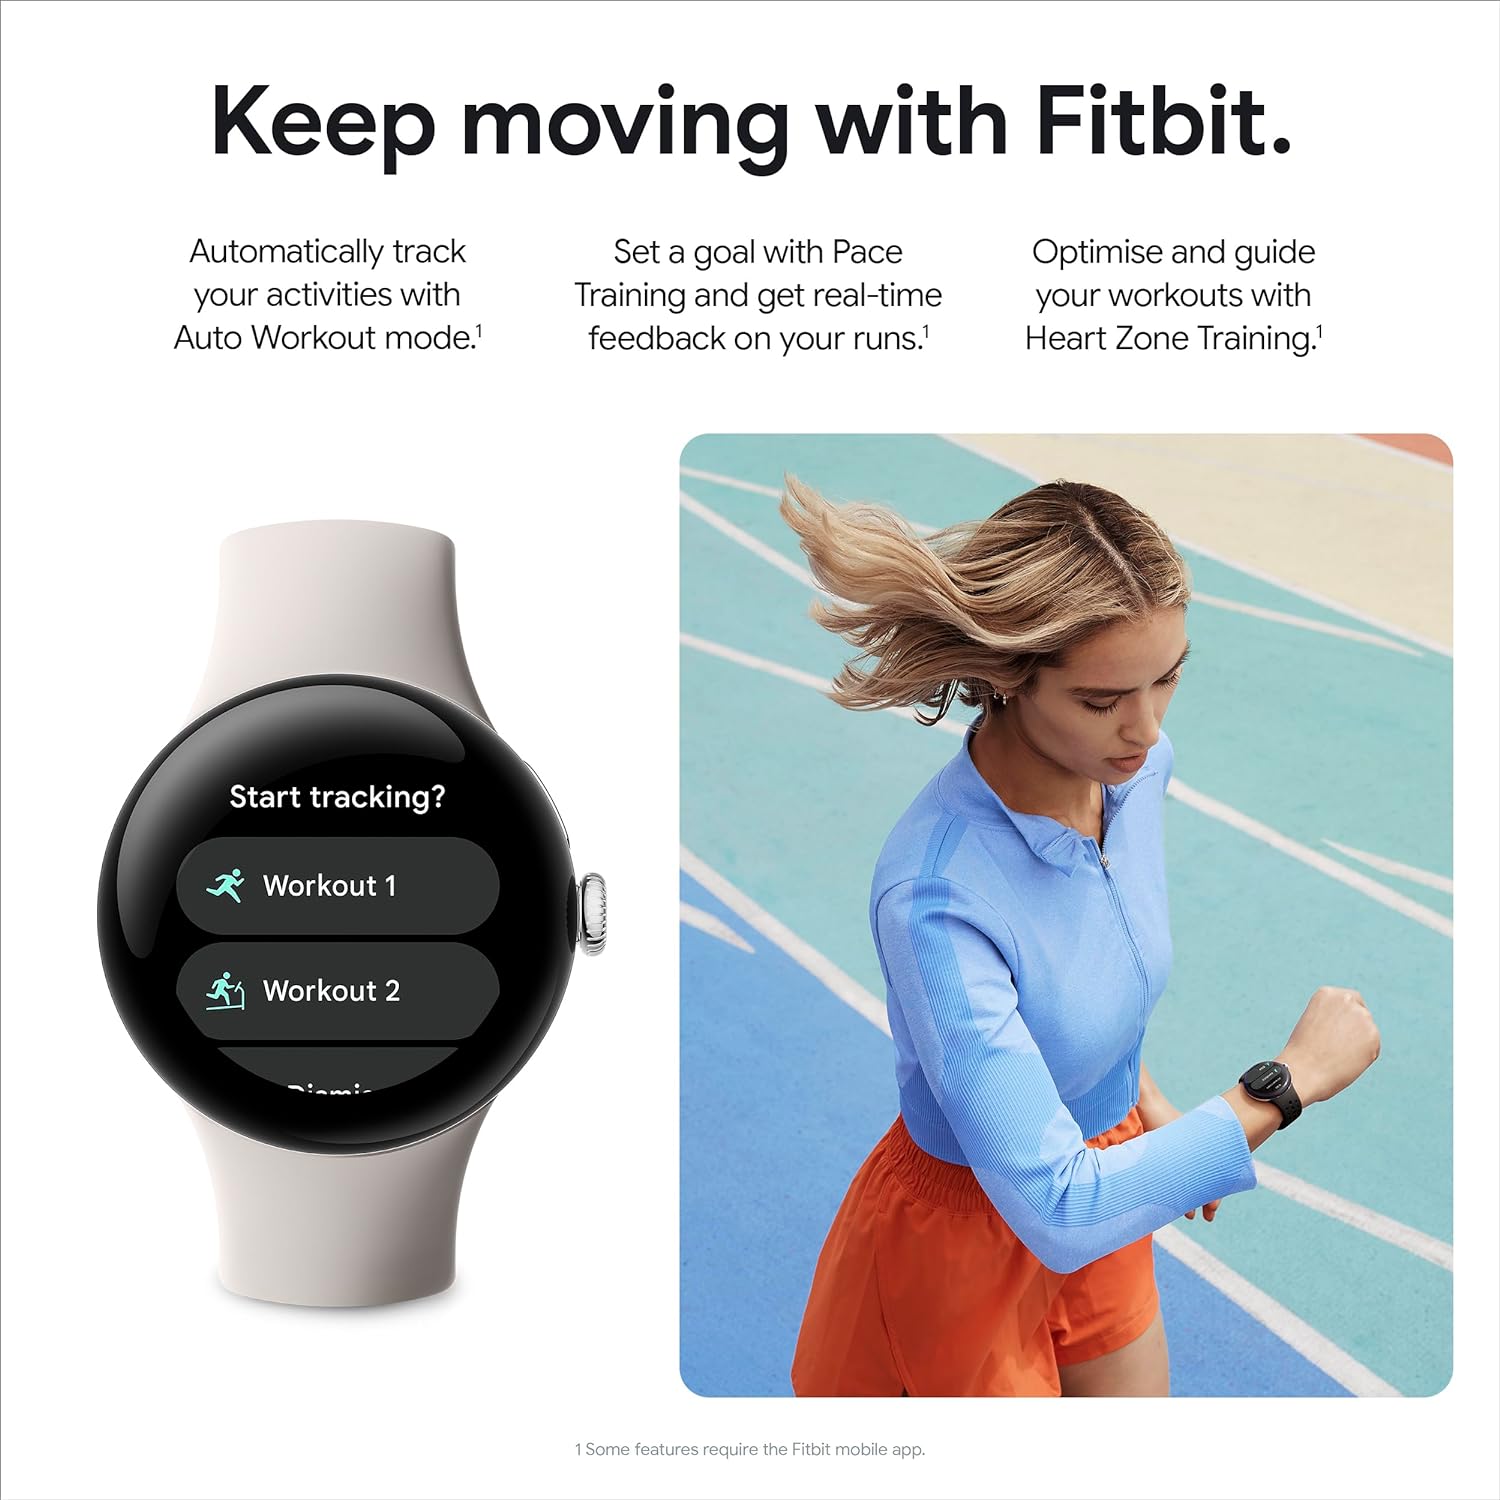 The image features an advertisement for Pixel Watch 2. On the left side of the image, there is a close-up of a Pixel Watch 2 showcasing its interface.